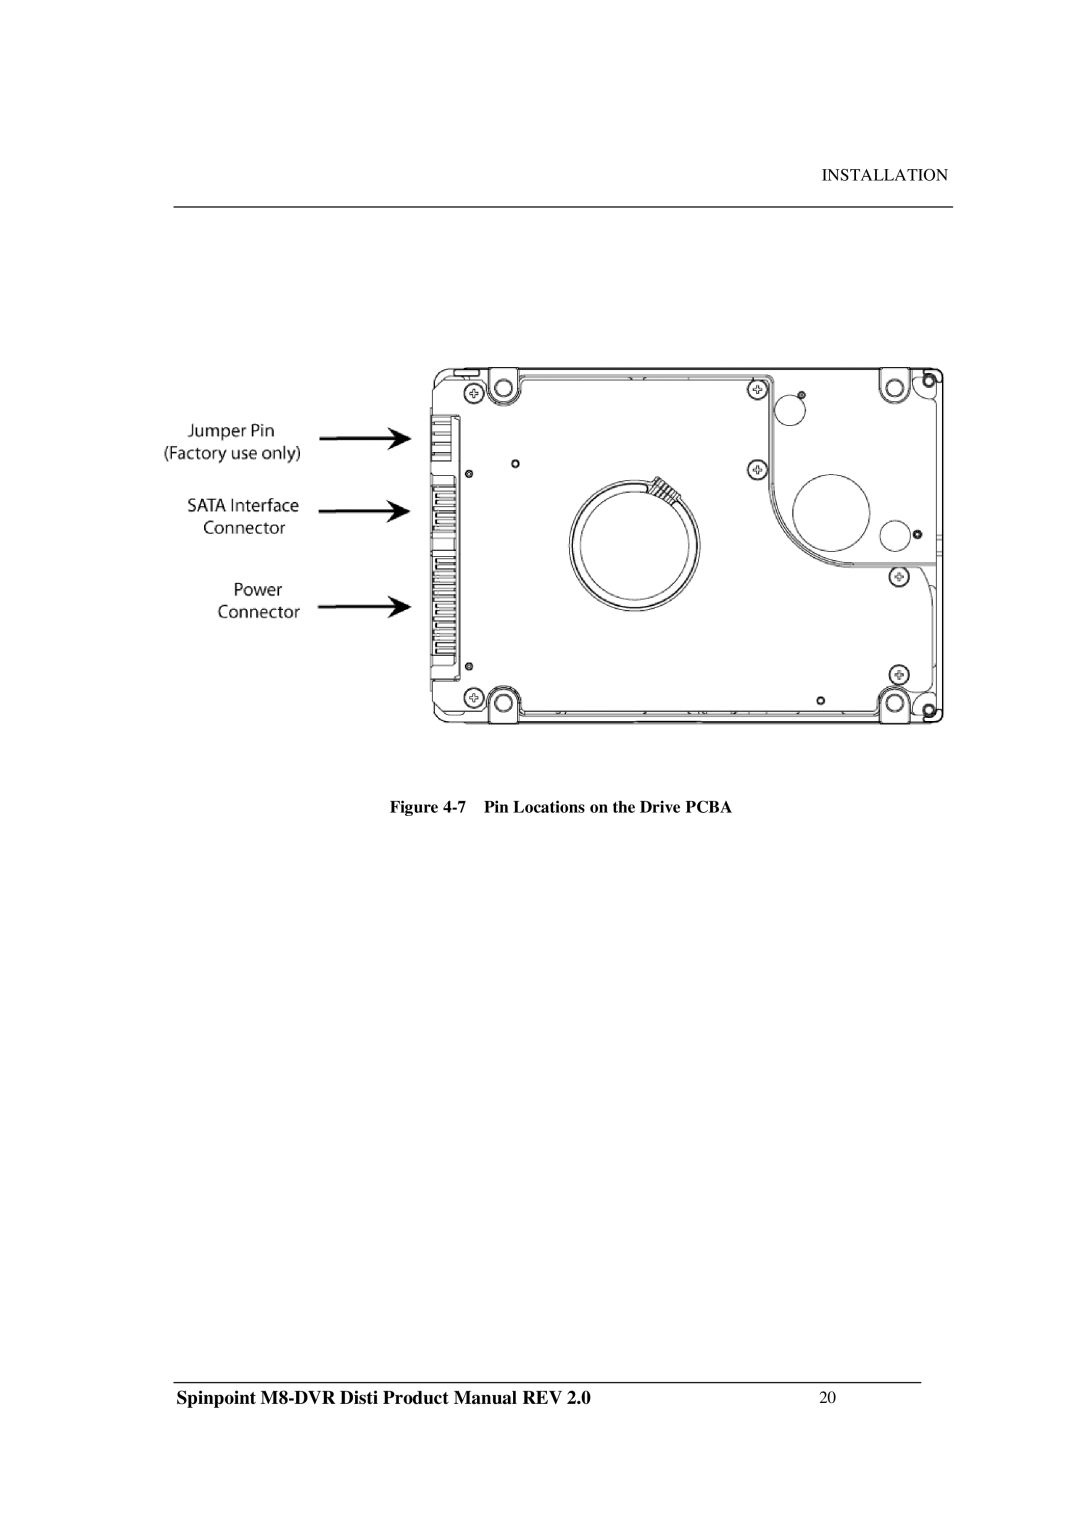 Samsung M8-DVR manual Pin Locations on the Drive Pcba 